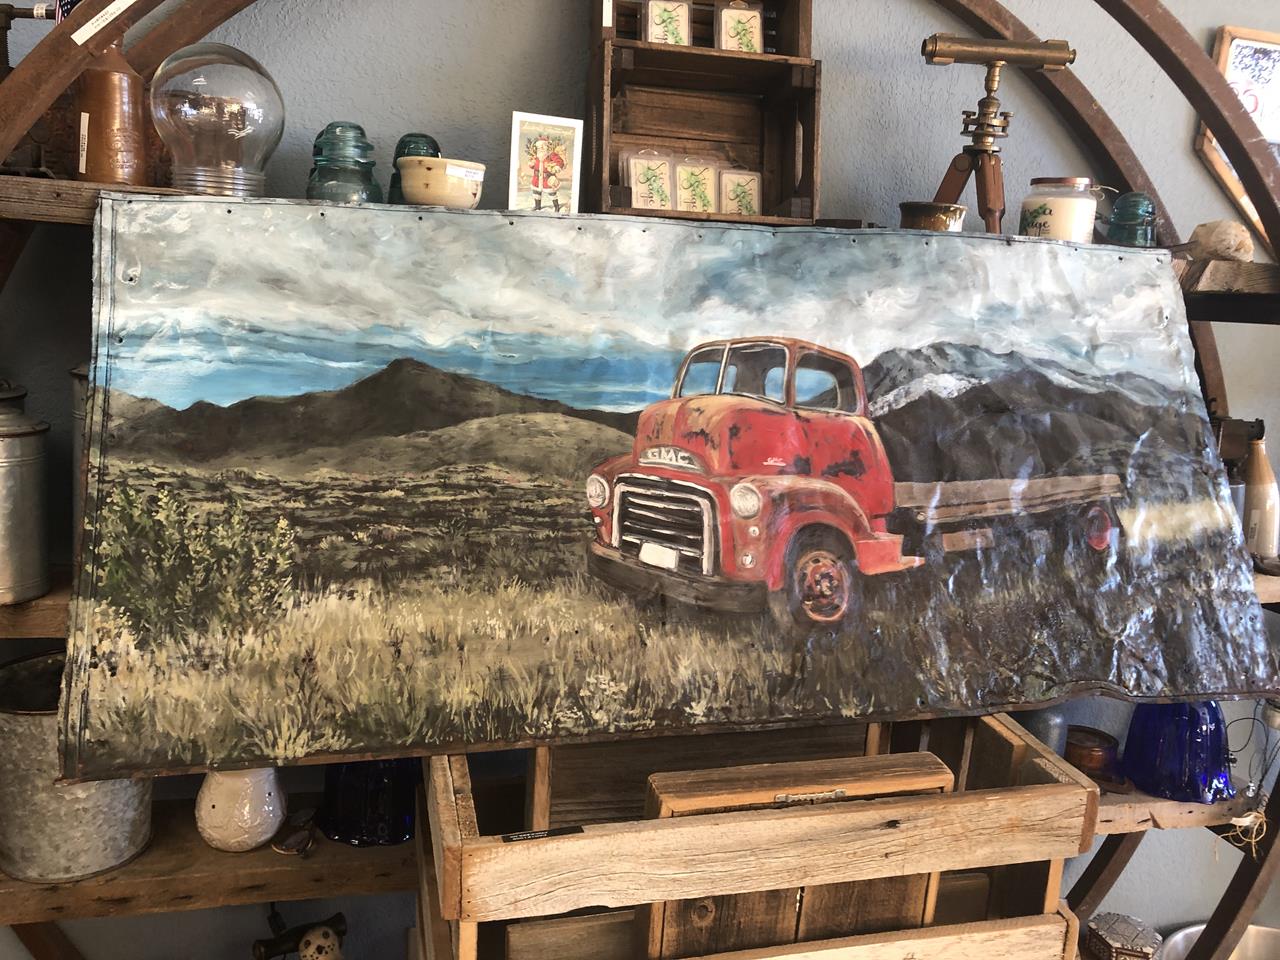 flat nose GMC truck in Nevada. We do a lot of Nevada scenes. Painting our favorite places and times.(..)